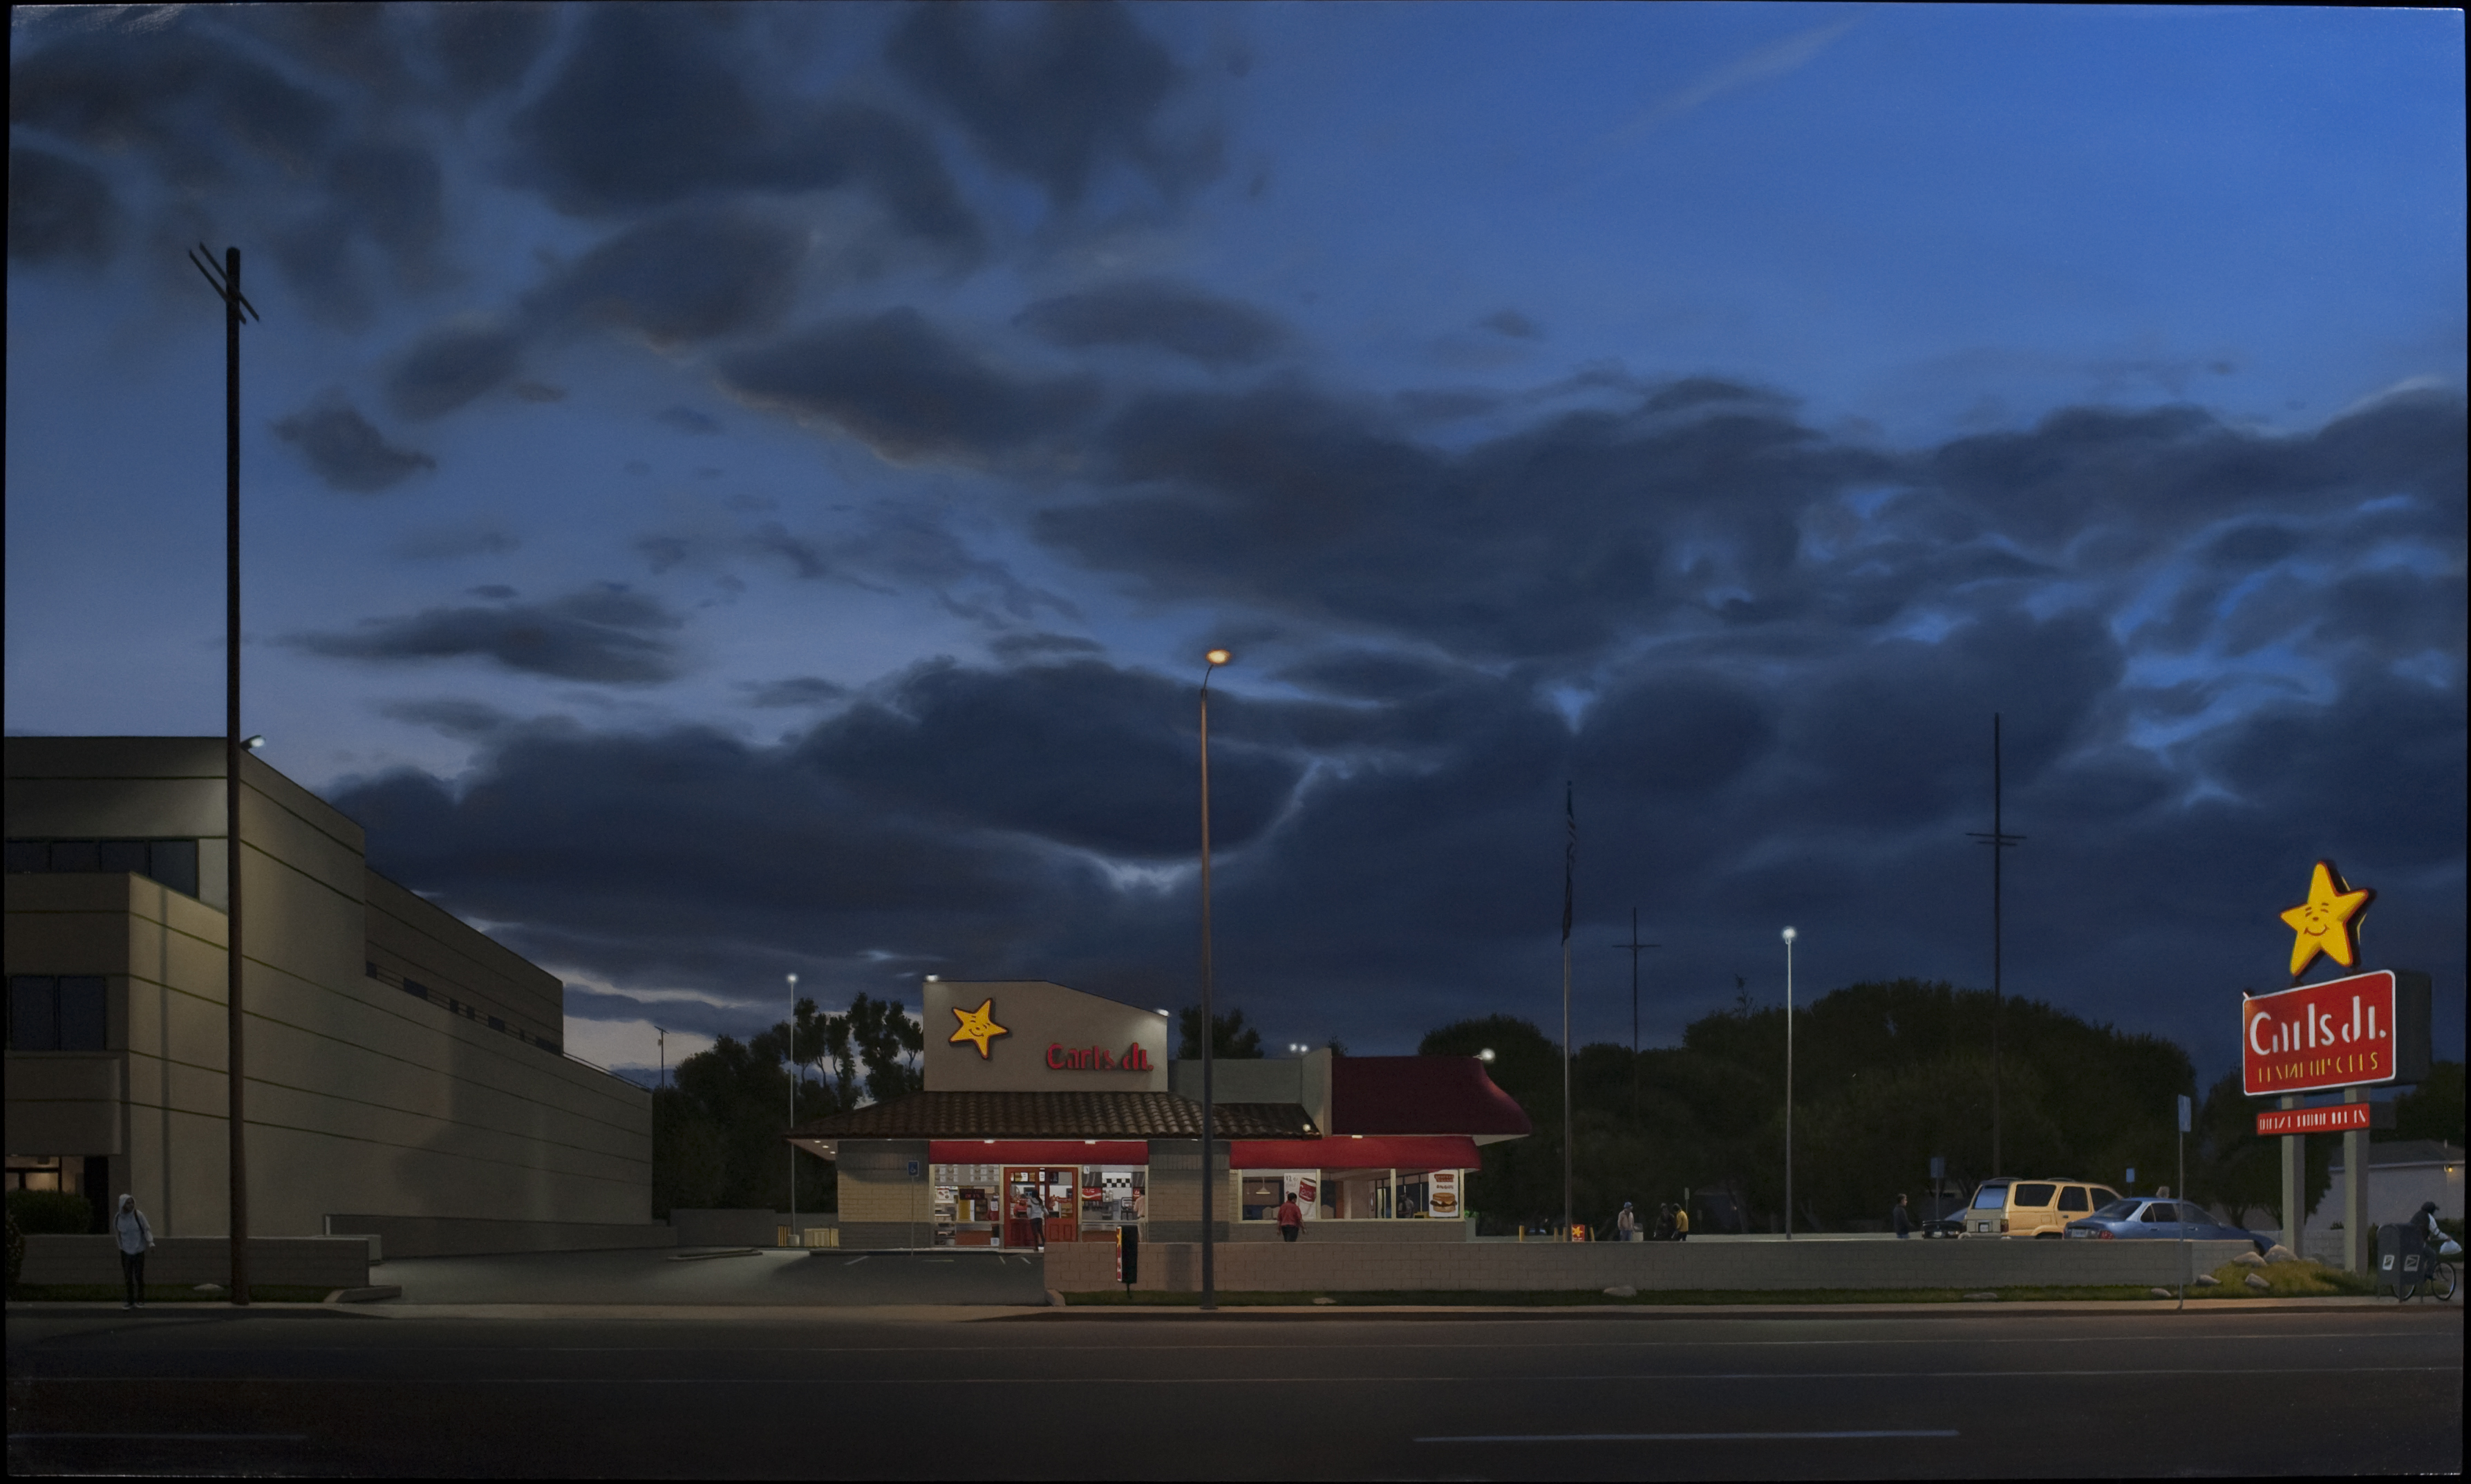 Marc Trujillo, 6457 Sepulveda Boulevard, 2011, oil on polyester. Courtesy of the artist 